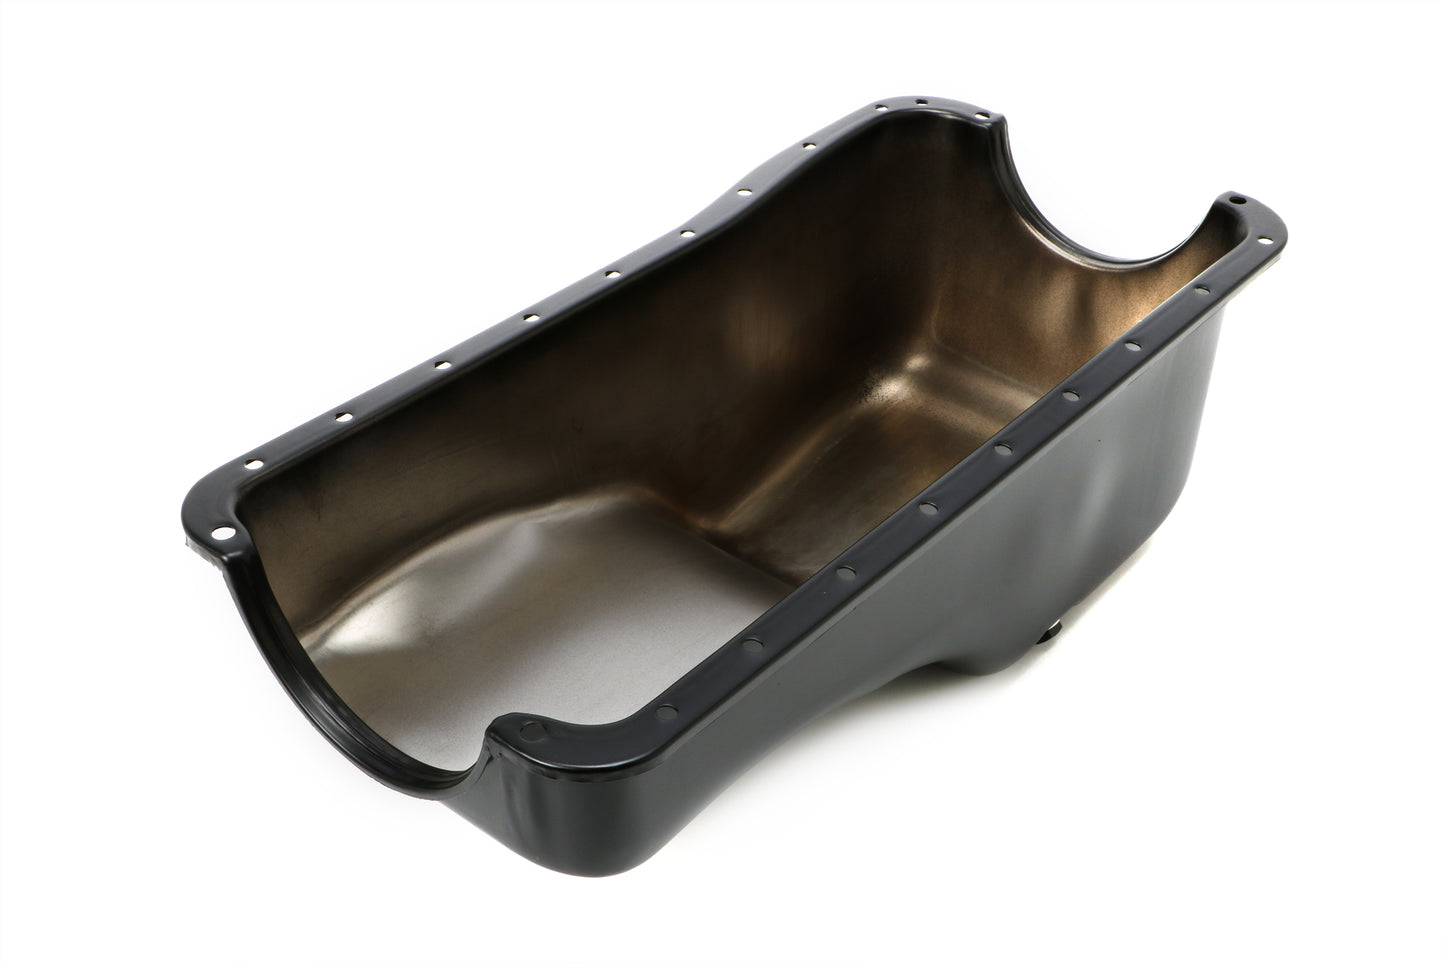 Trans-Dapt Performance Oem-Style Oil Pan- 1968-78 Ford 429-460; Passenger Cars Only Not For Trucks Or Marine Use; Stock Capacity- Black Powder-Coated 8718